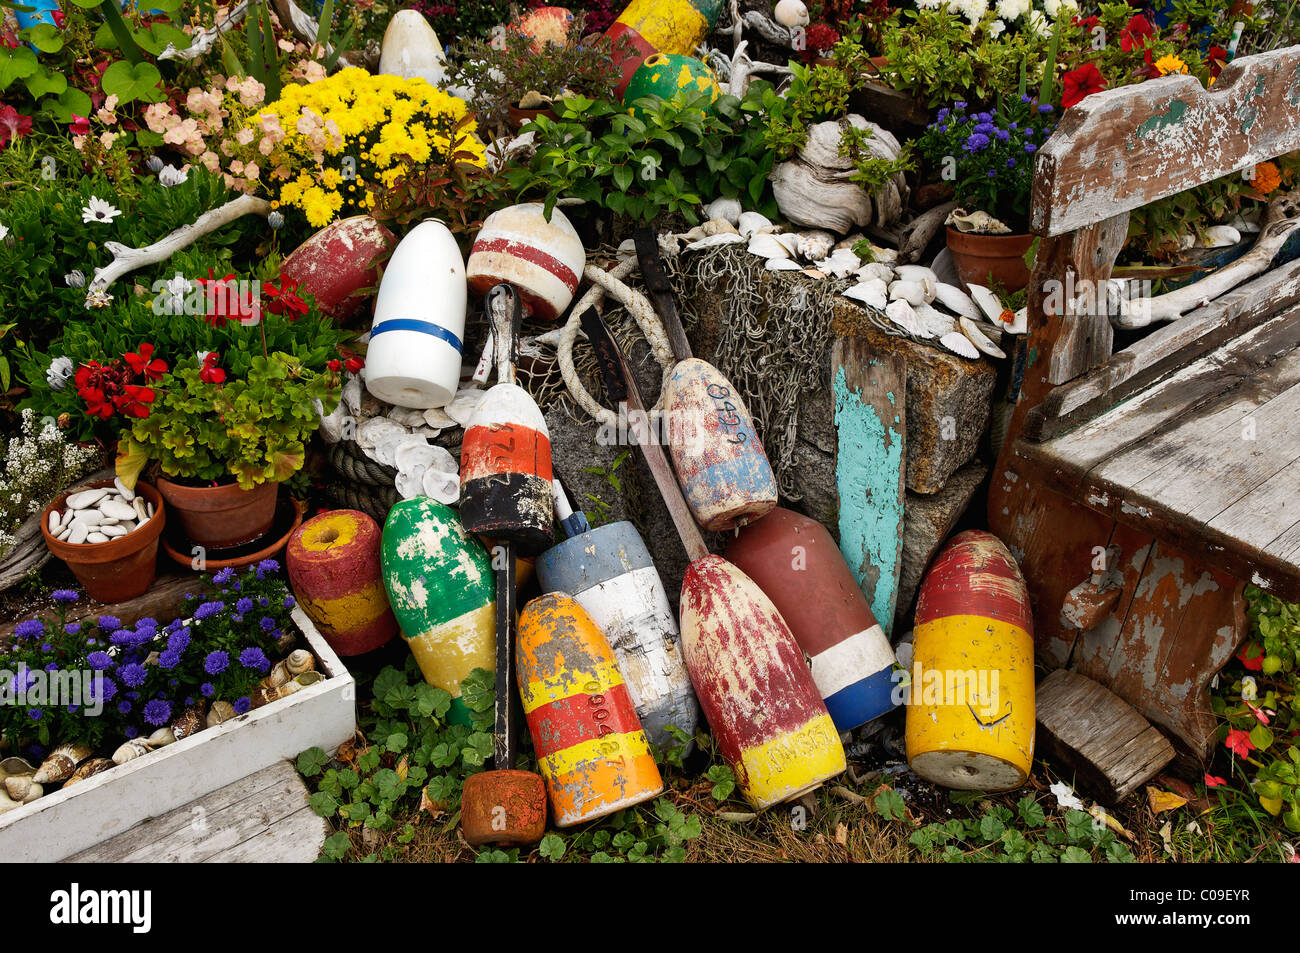 Old Lobster Buoys in New England Garden in Rockport, Massachusetts Stock Photo